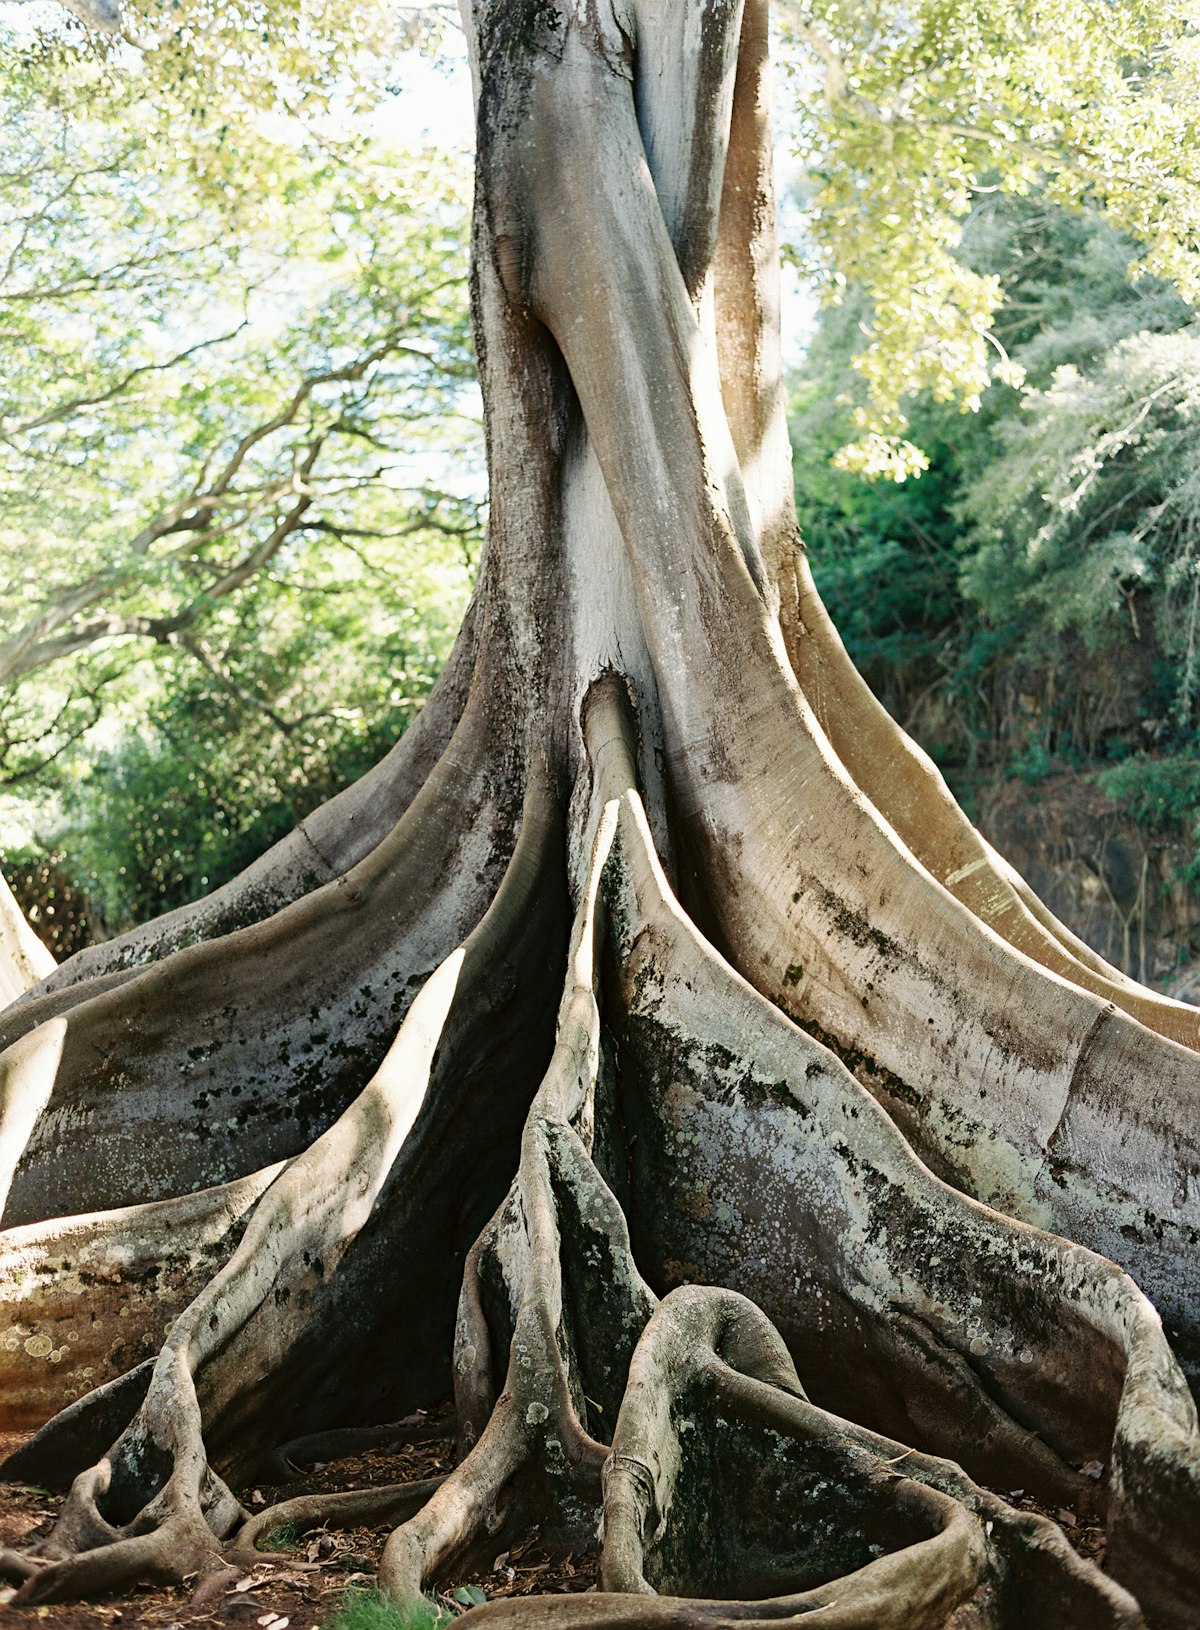 Lonely Planet Magazine, Issue 123, March 2019, Hawaii, trunk, flora
The Moreton Bay fig trees in Allerton Garden were film backdrops in Jurassic Park.